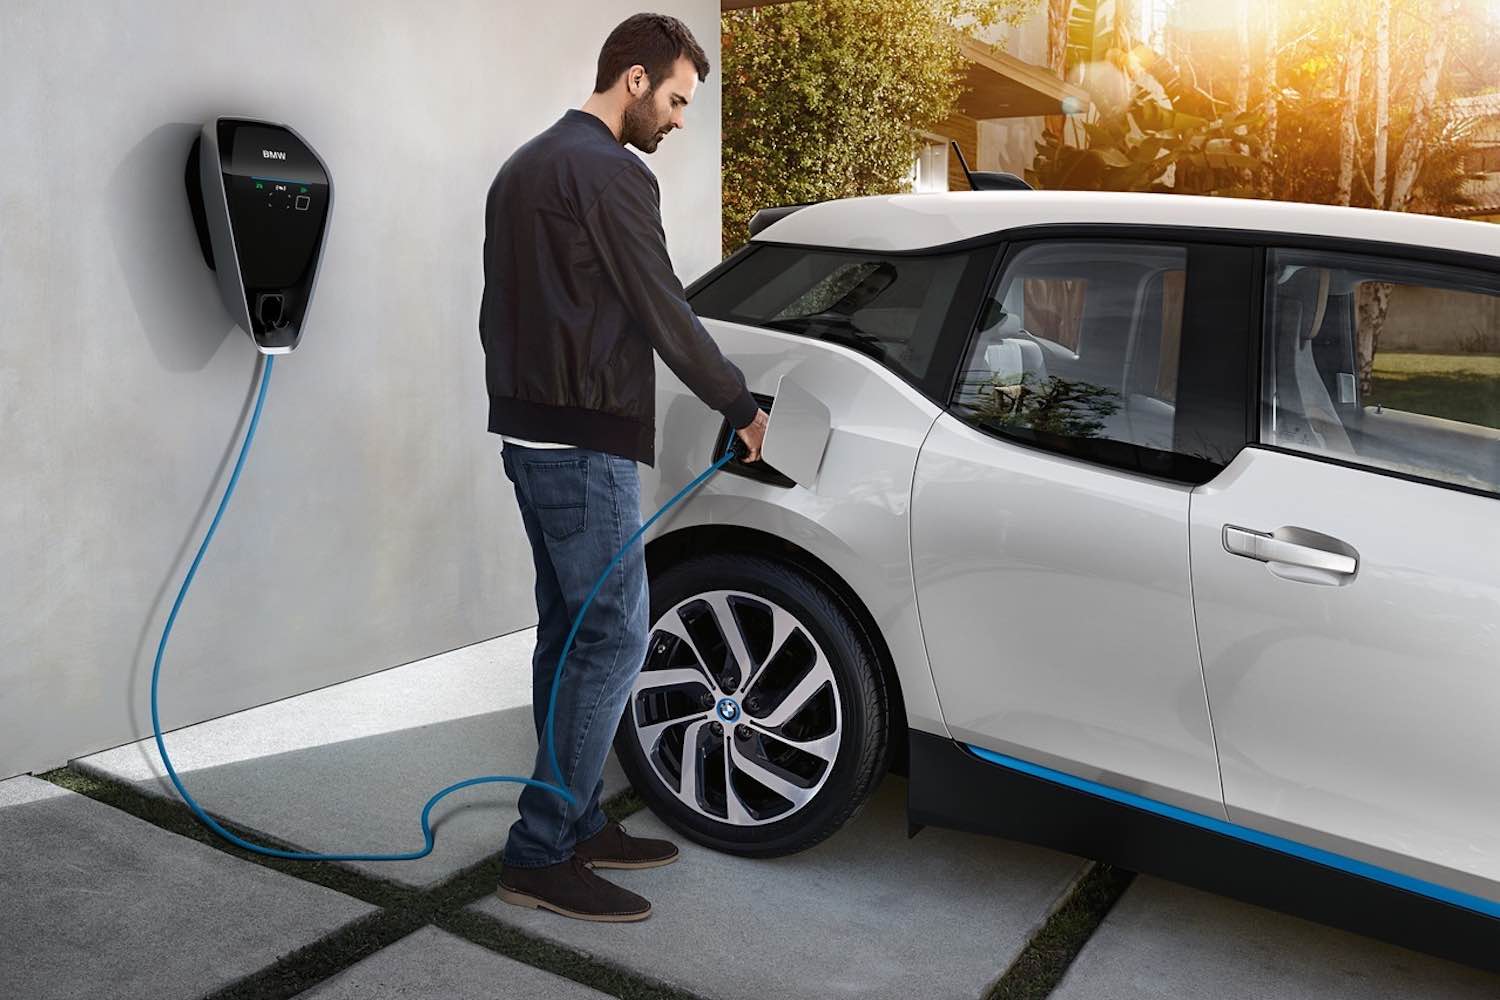 Car News | All households now qualify for EV charger grant